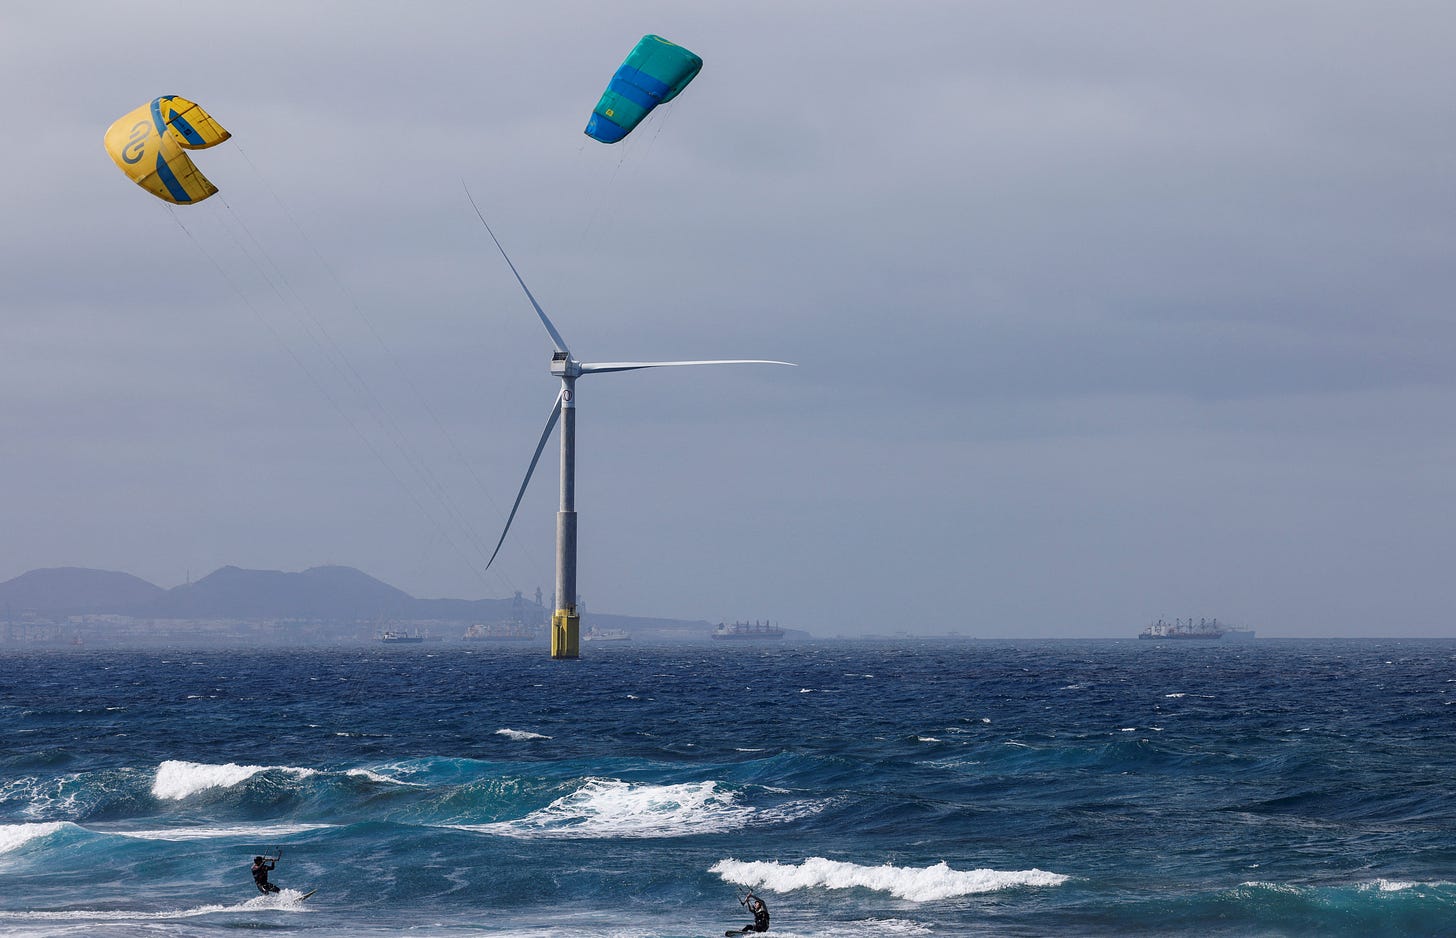 Two sportsmen sail near an offshore wind turbine of the Siemens Gamesa company is seen from the Telde coast on the island of Gran Canaria